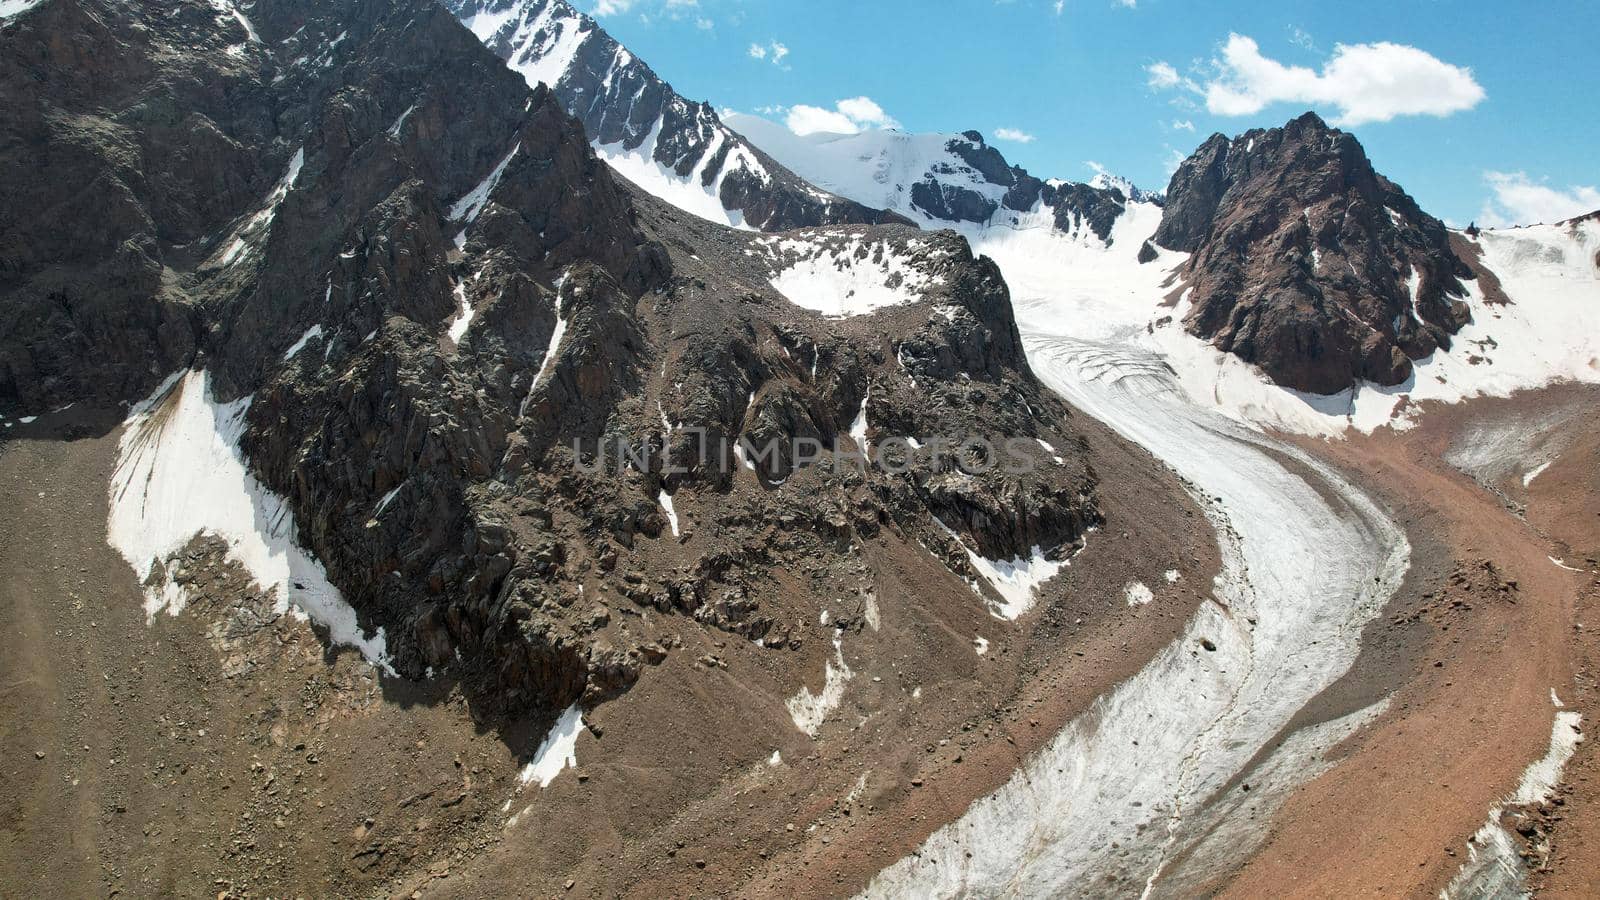 High rocky mountains are sometimes covered with ice and snow. A huge glacier passes between the peaks. The ice is gradually melting. The stones are lying on glacier. Steep cliffs. The view from drone